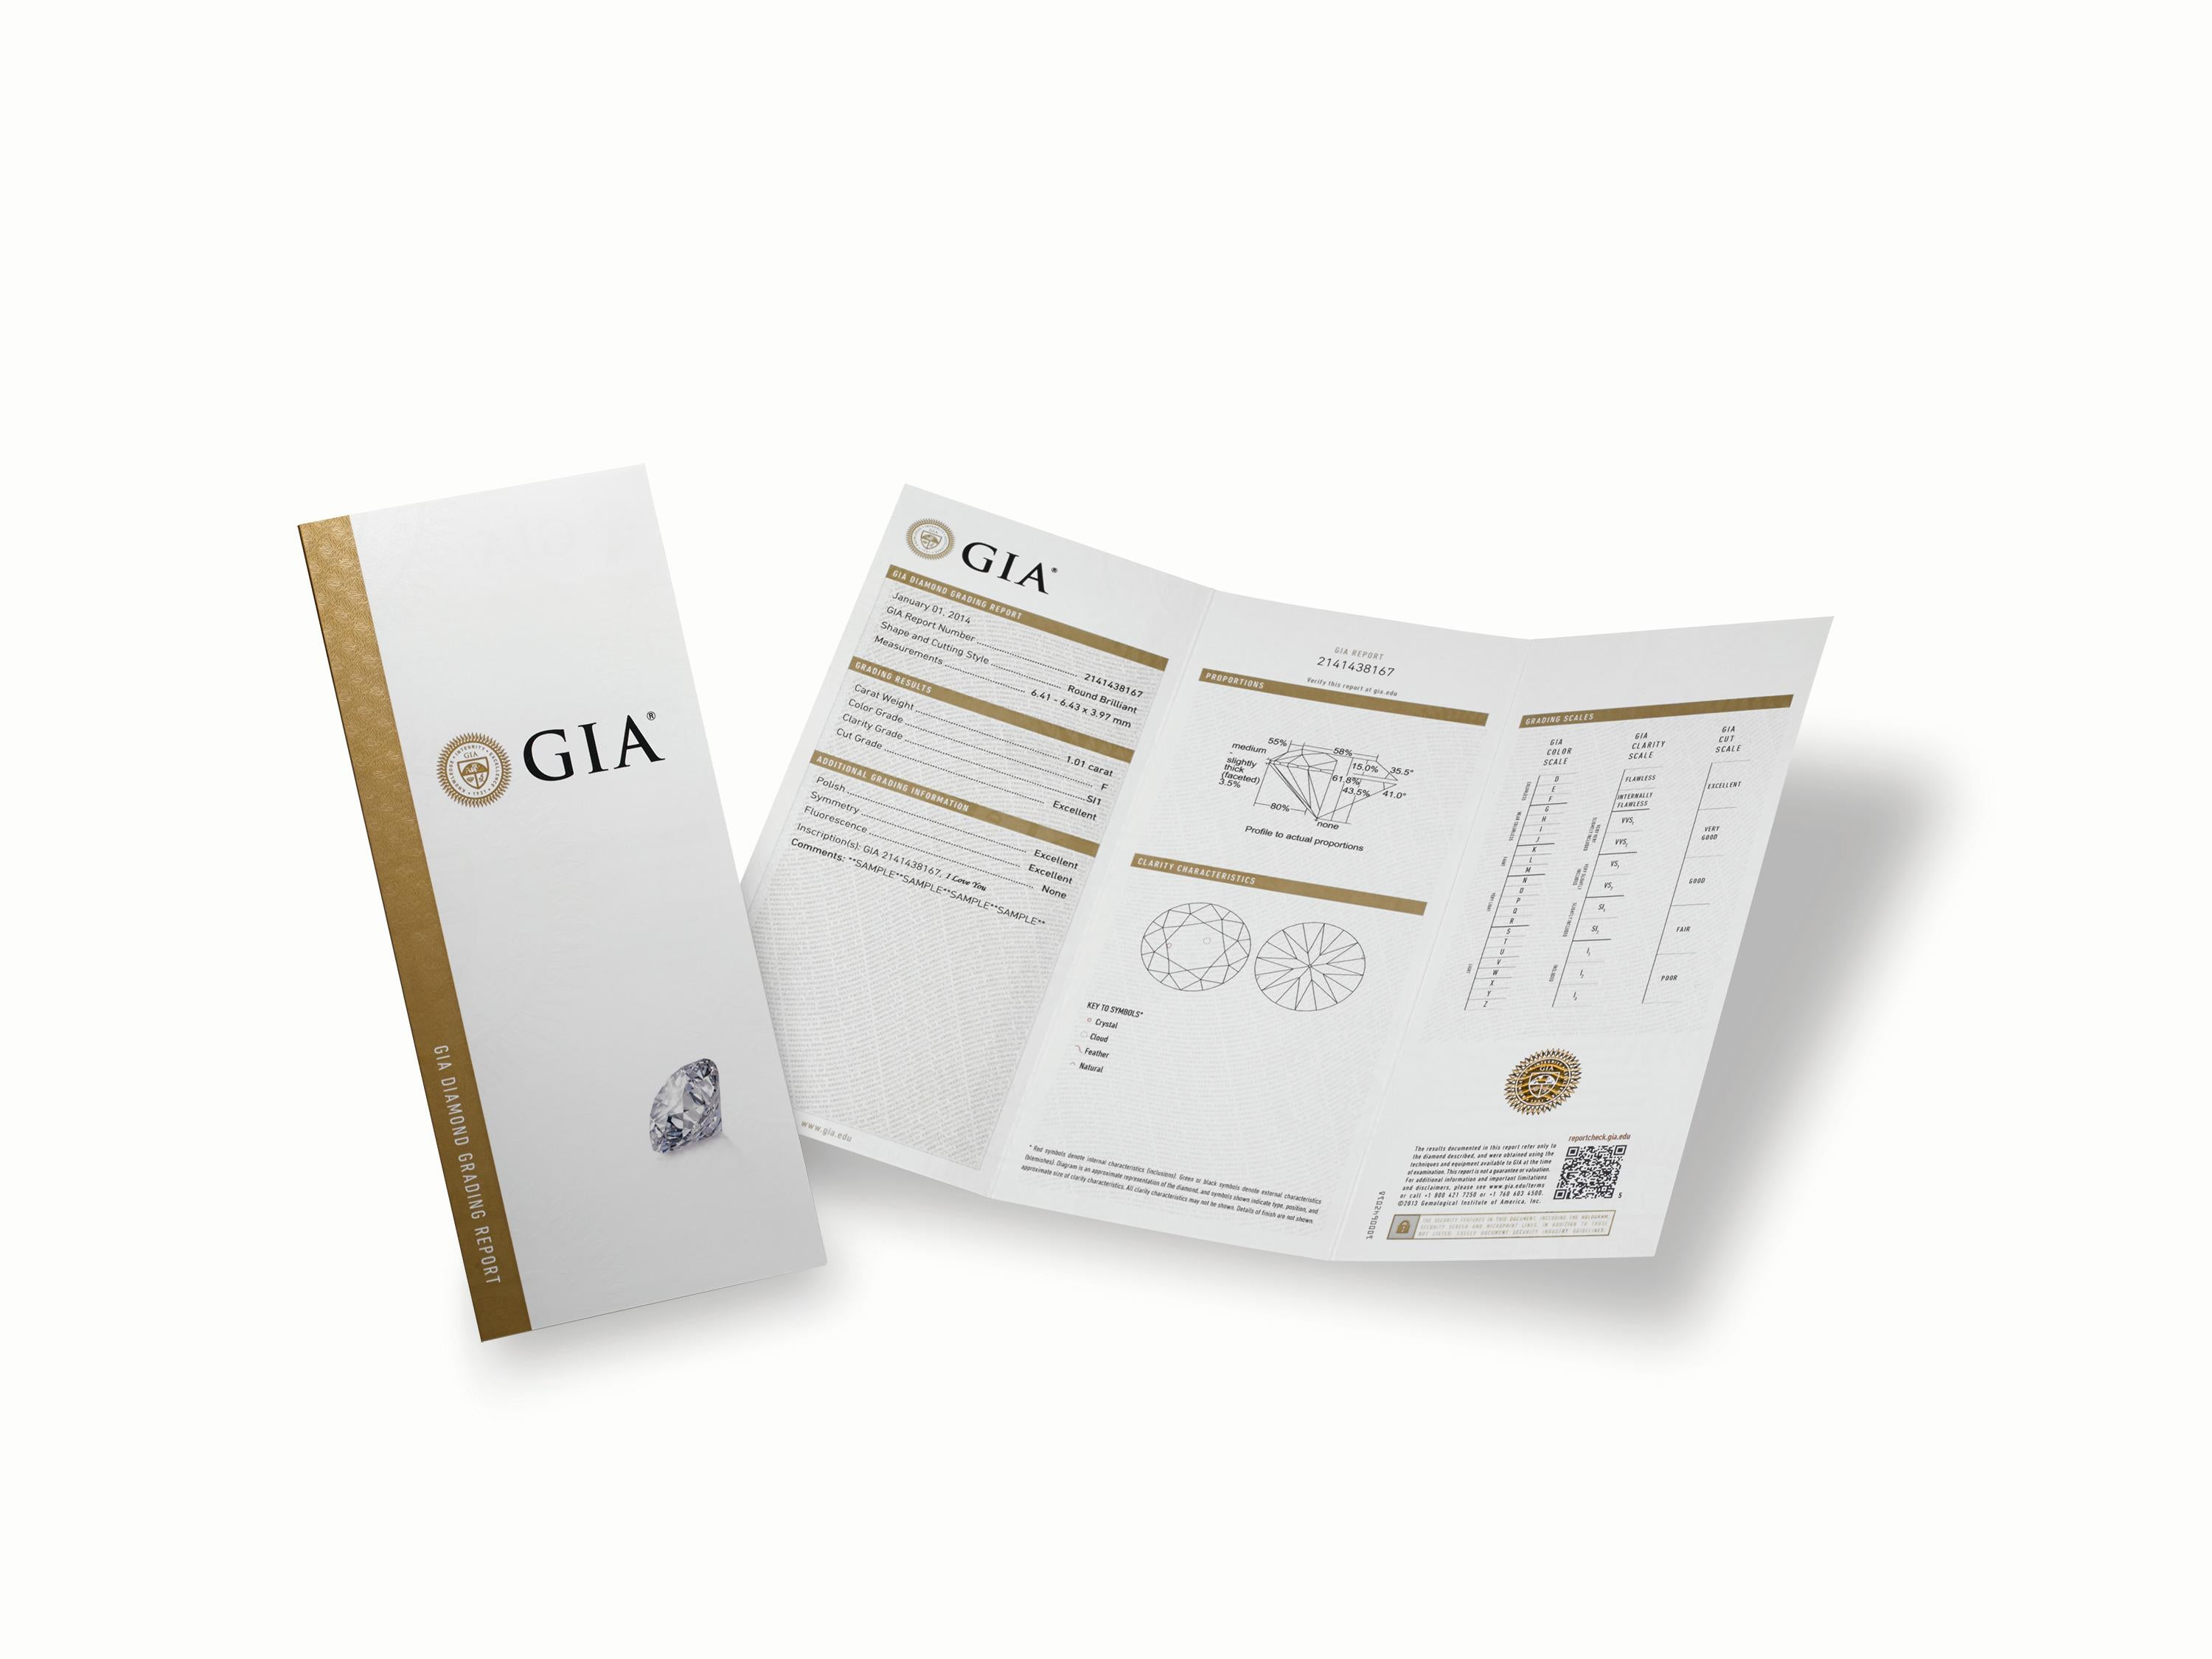 GIA Certified 4.00-4.10 Carat, G-F/VVS, Emerald Cut, Excellent Natural Diamond

Perfect Diamonds for Perfect Gifts.

5 C's:
Certificate: GIA
Carat: 4.00-4.10ct
Color: G-F
Clarity: VVS2-VVS1(Very Very Slightly Included)
Cut: Very